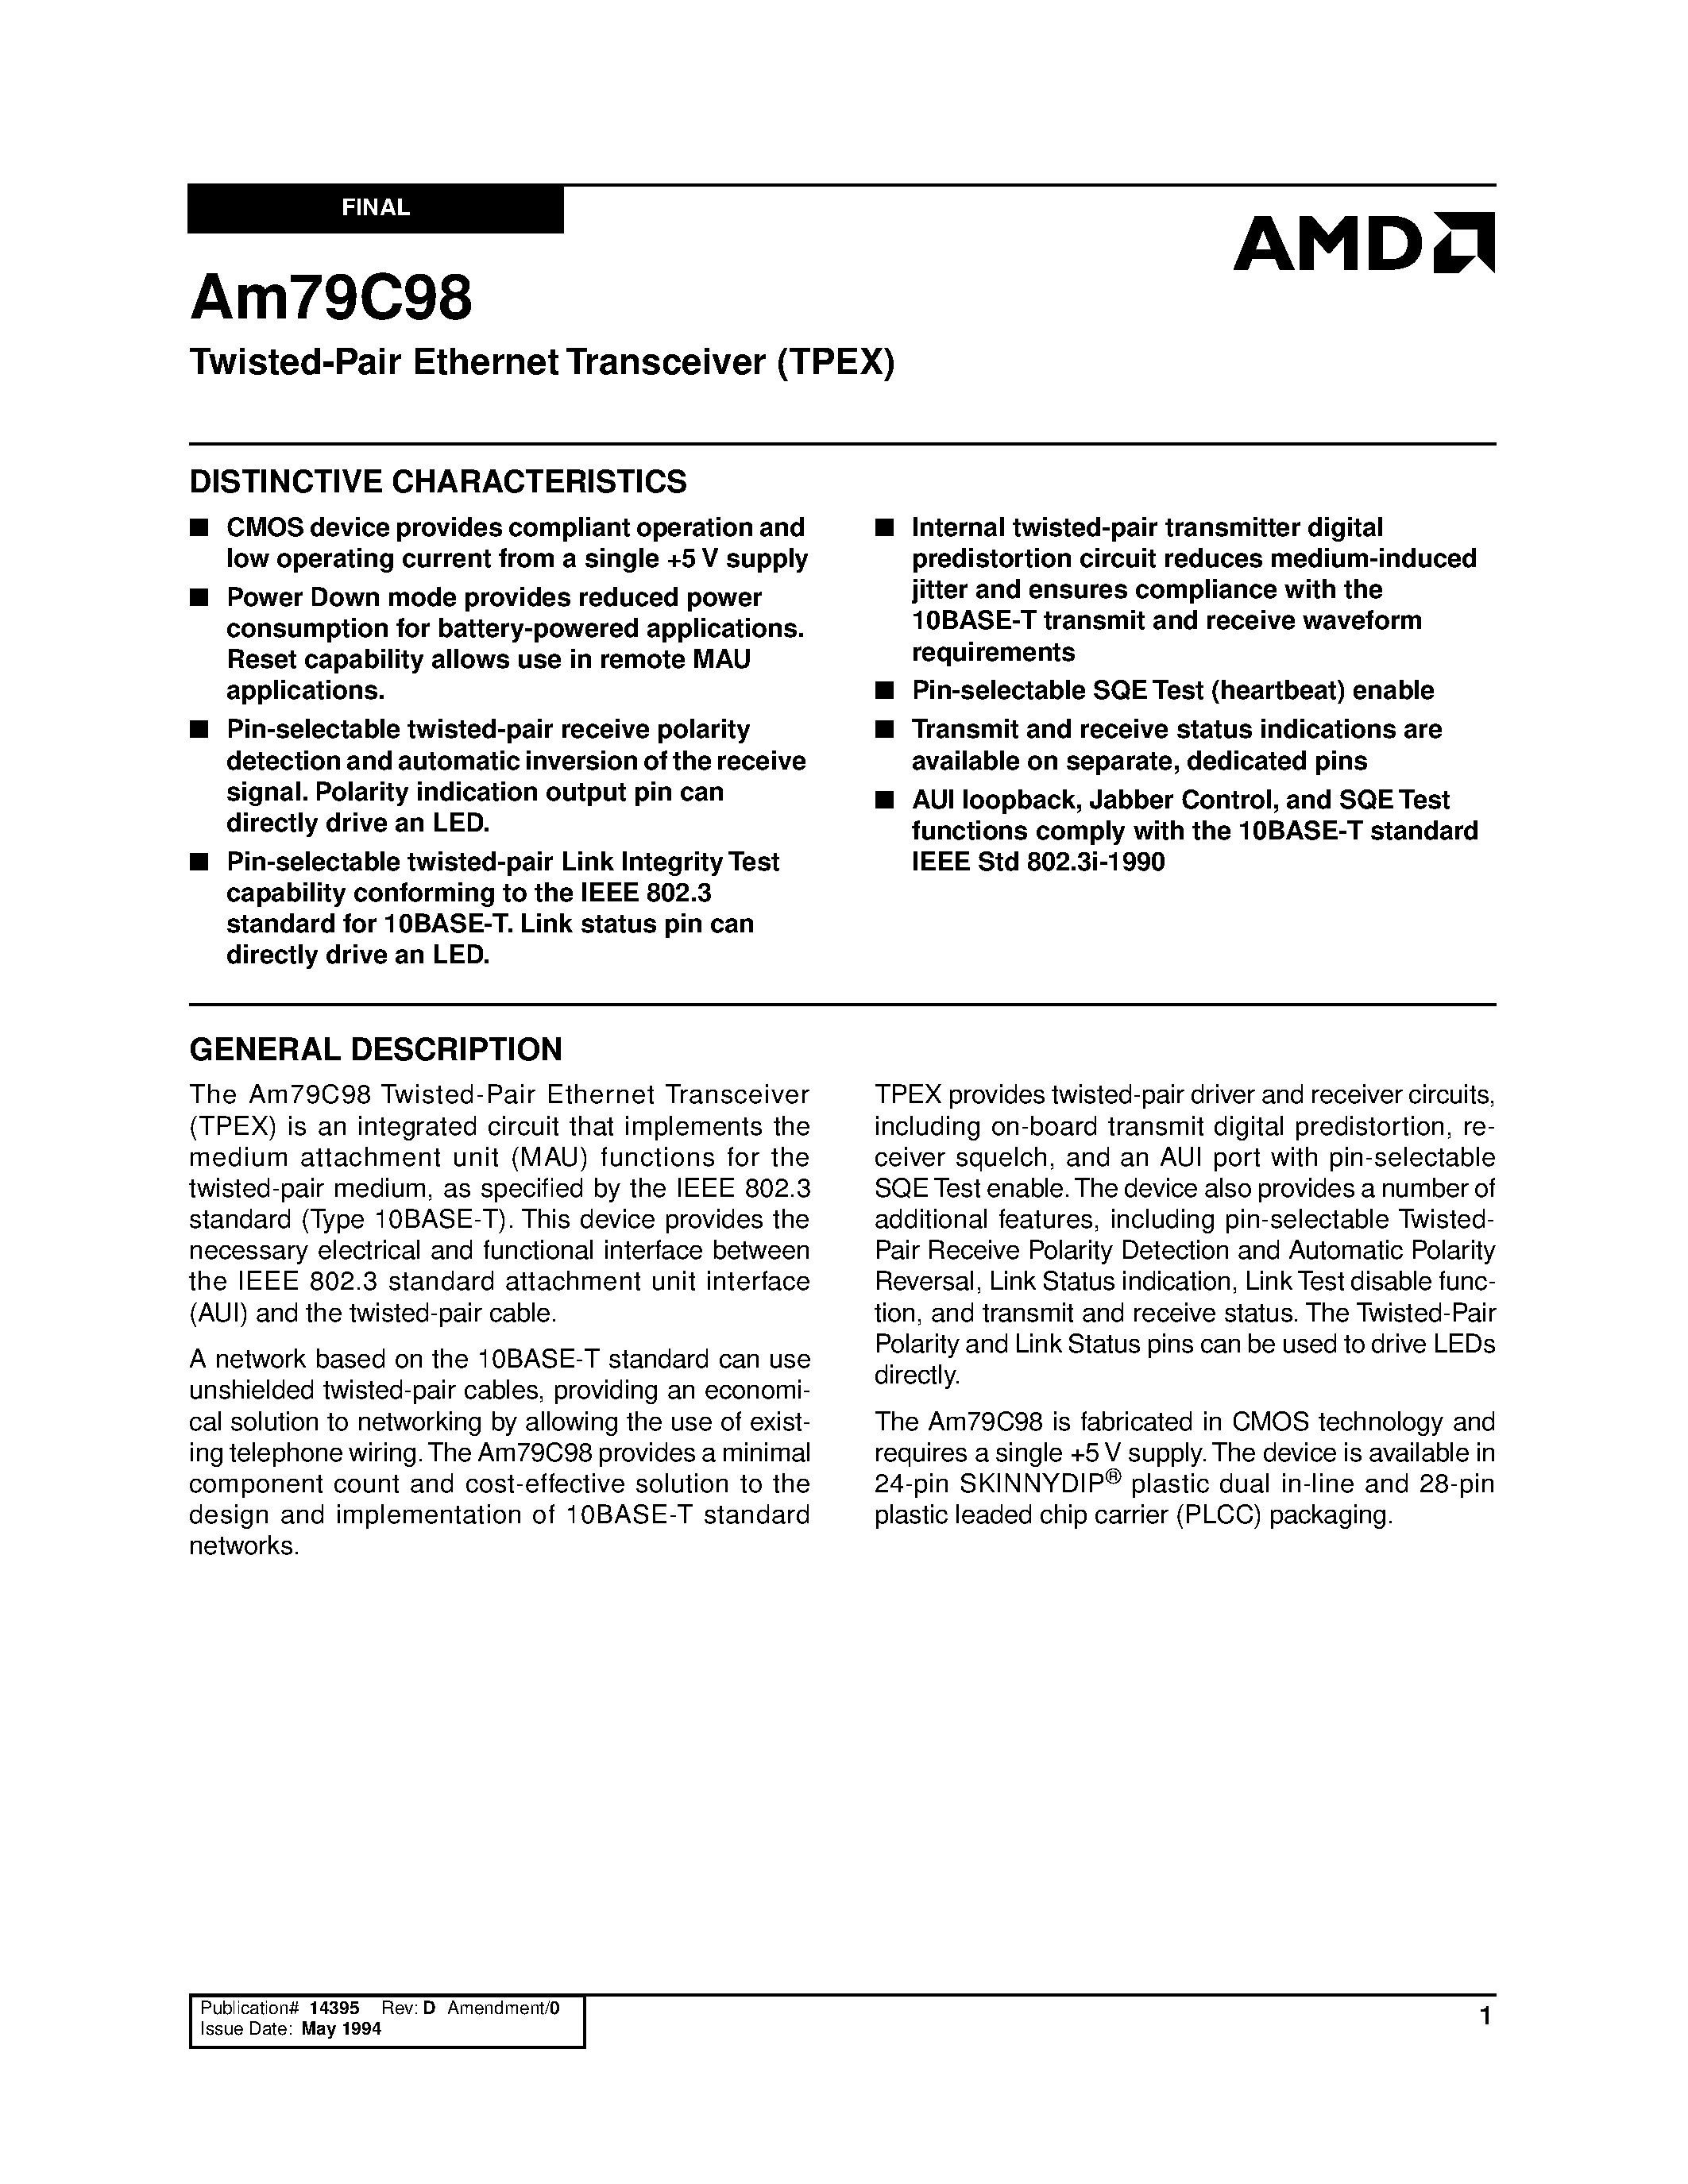 Datasheet AM79C98 - Twisted-Pair Ethernet Transceiver (TPEX) page 1